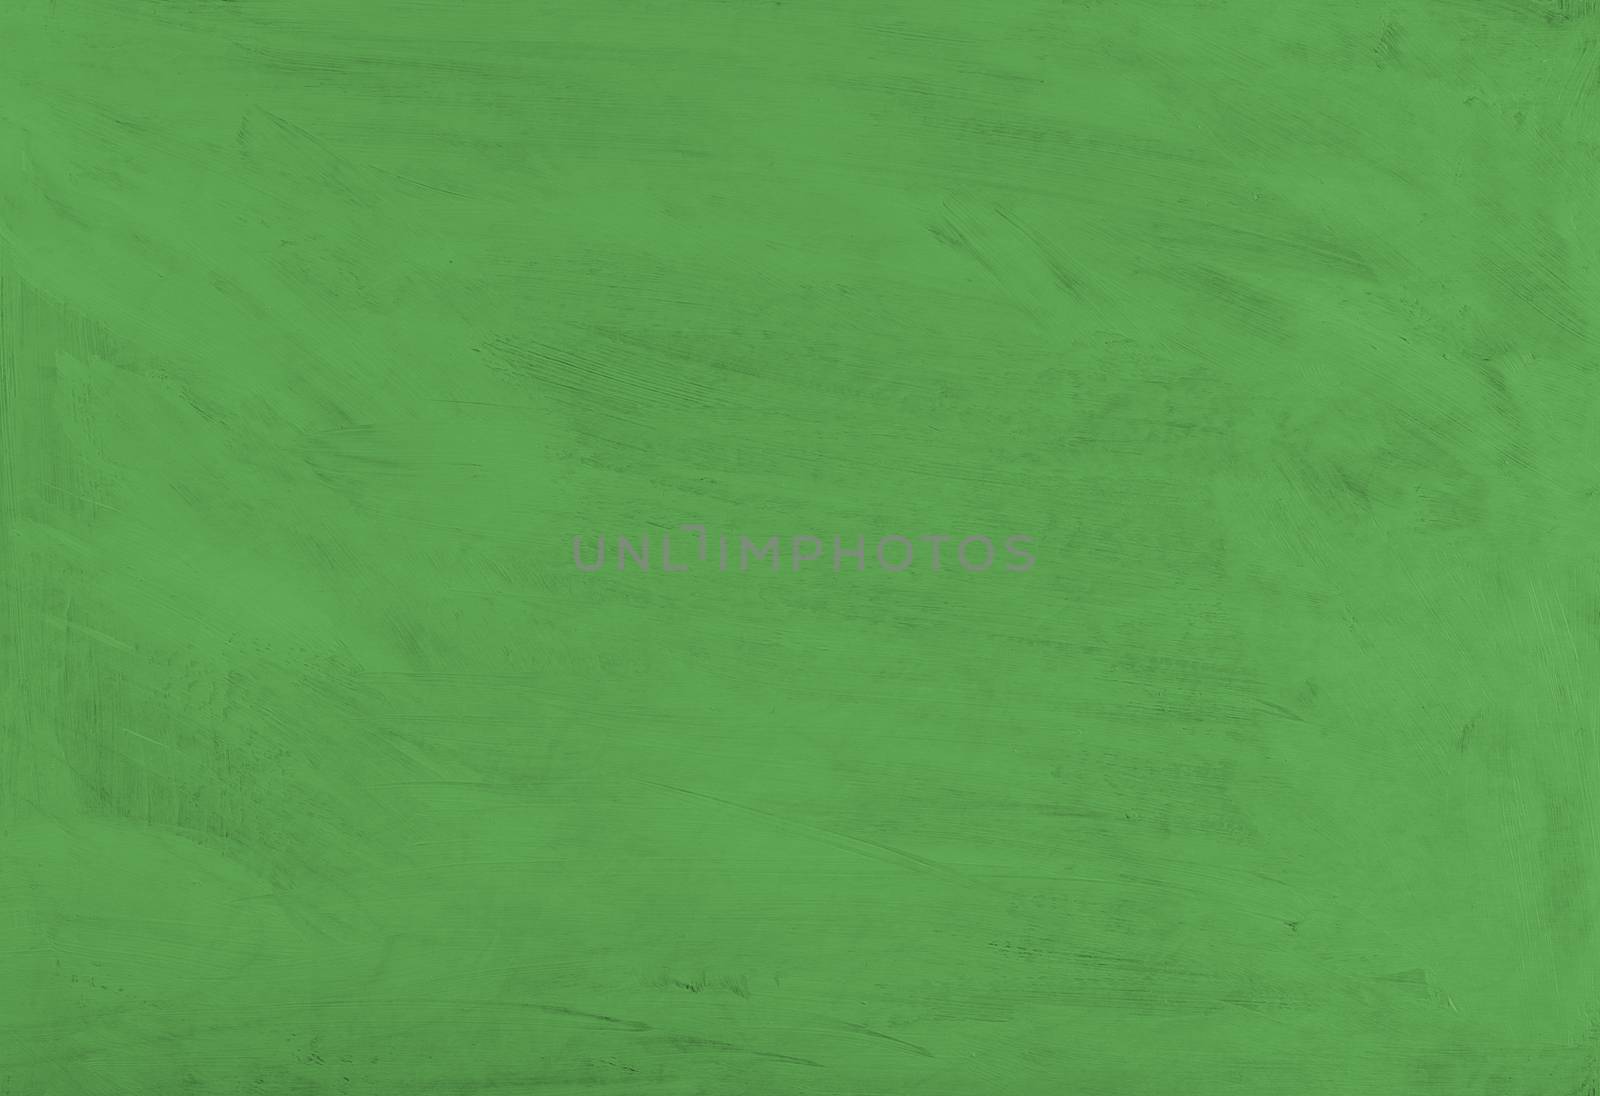 Green painted textured abstract background with brush strokes in gray and black shades